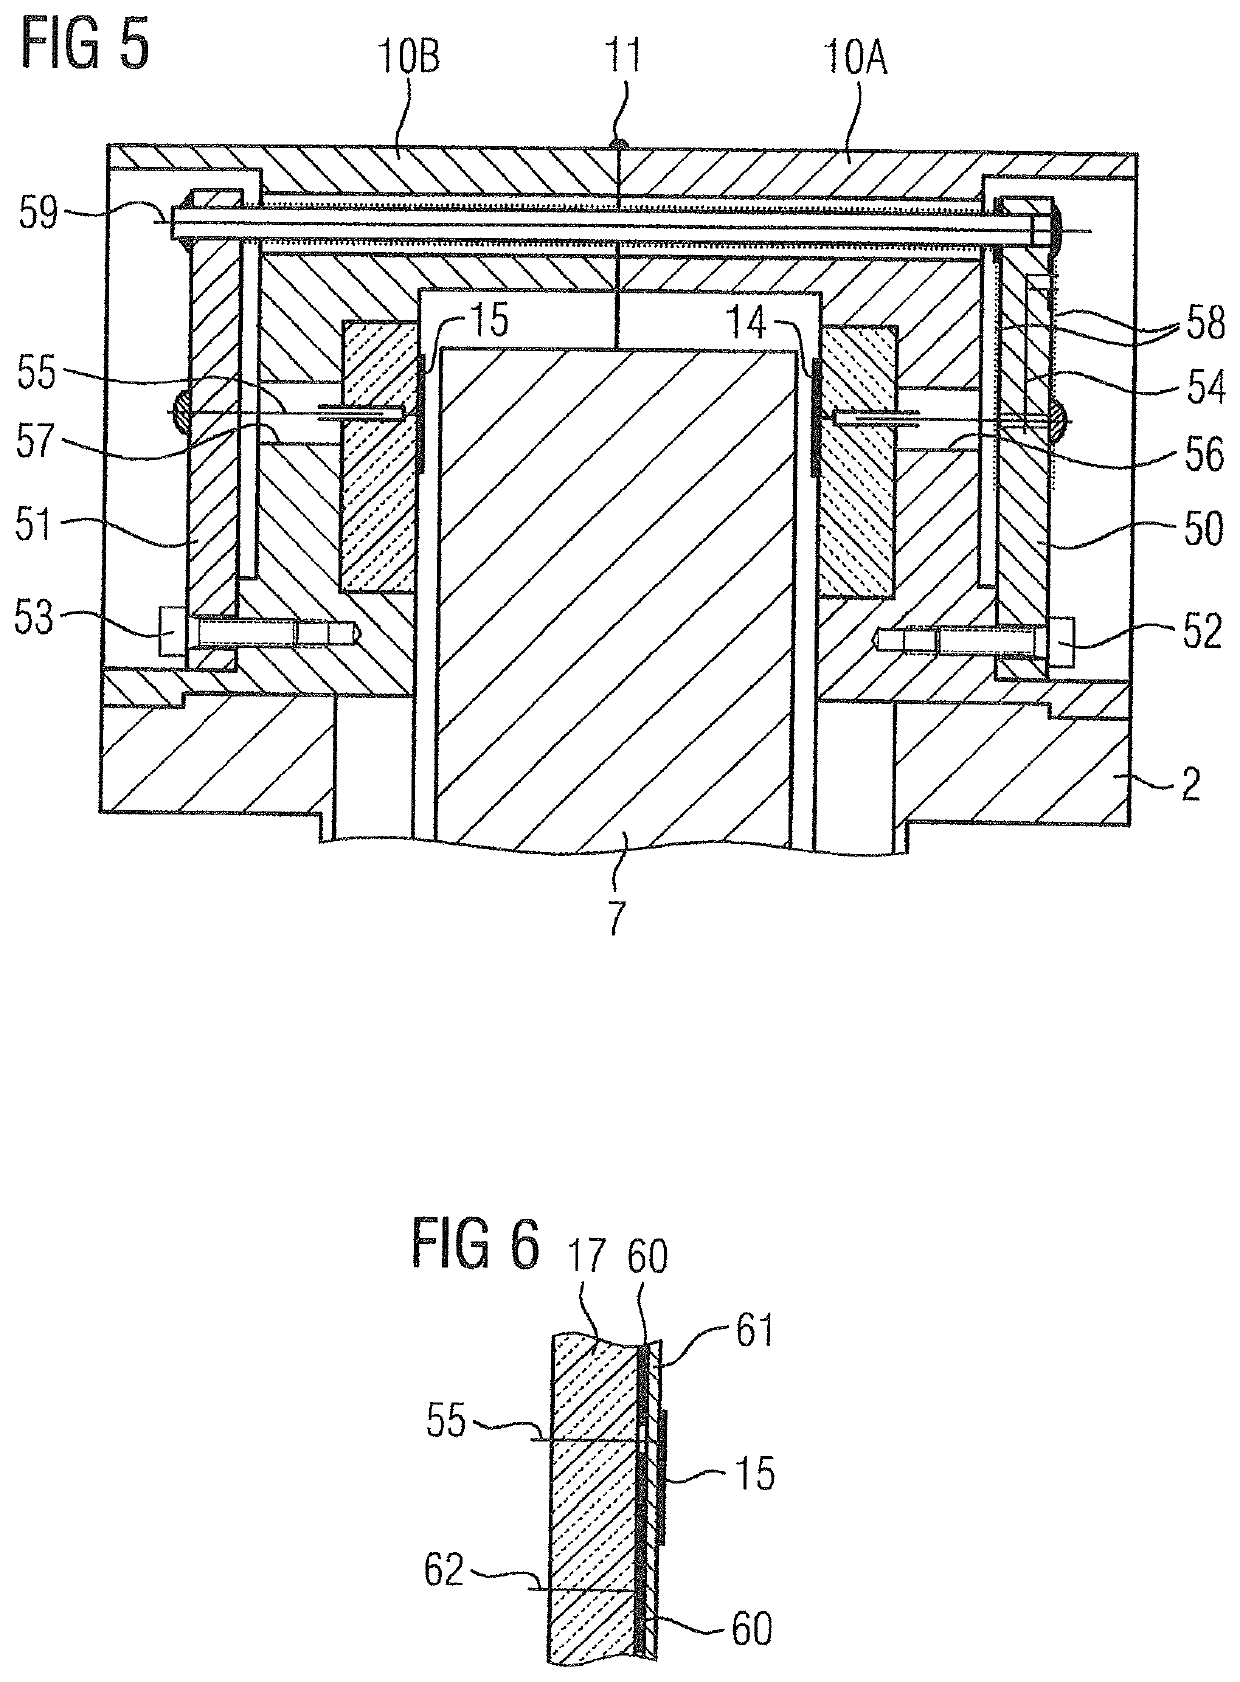 Pressure sensor assembly and measurement transducer for process instrumentation with the pressure sensor assembly